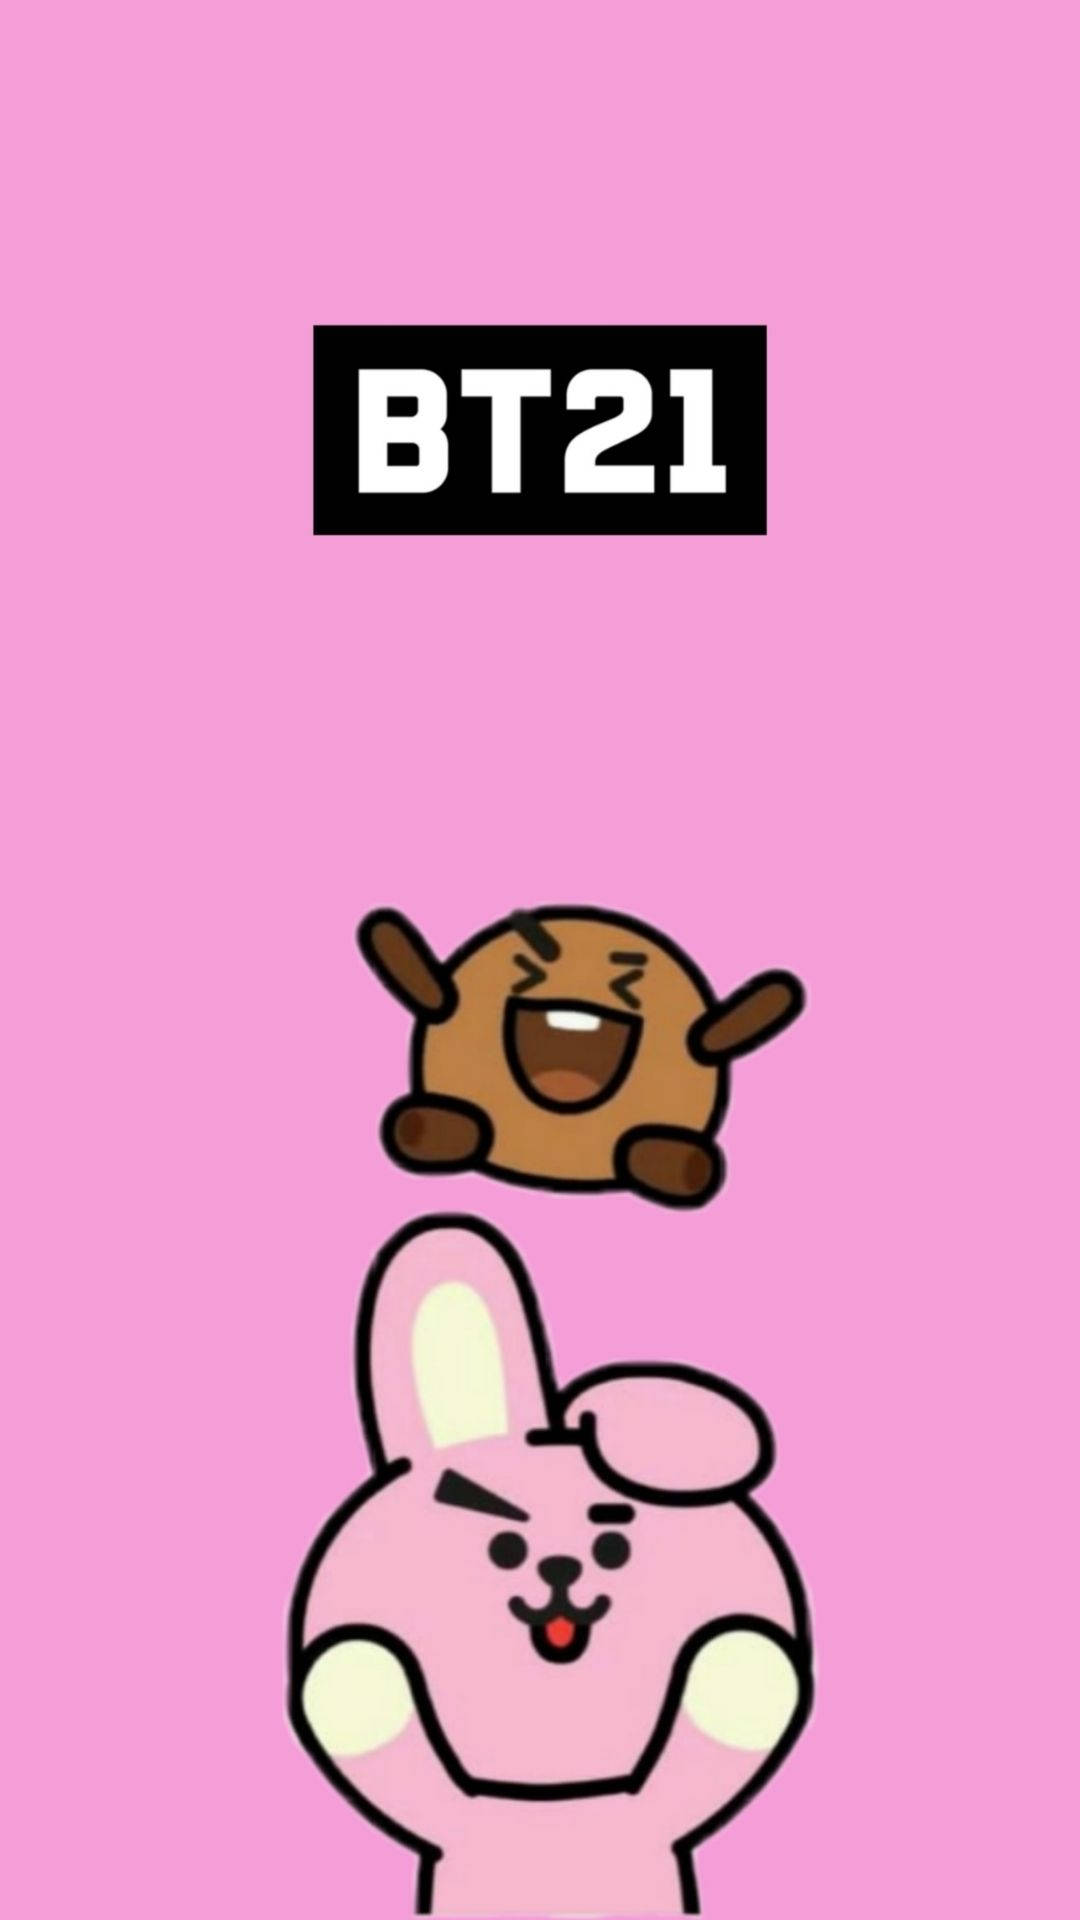 Download Bt21 Jolly Cooky And Shooky Wallpaper Wallpapers Com